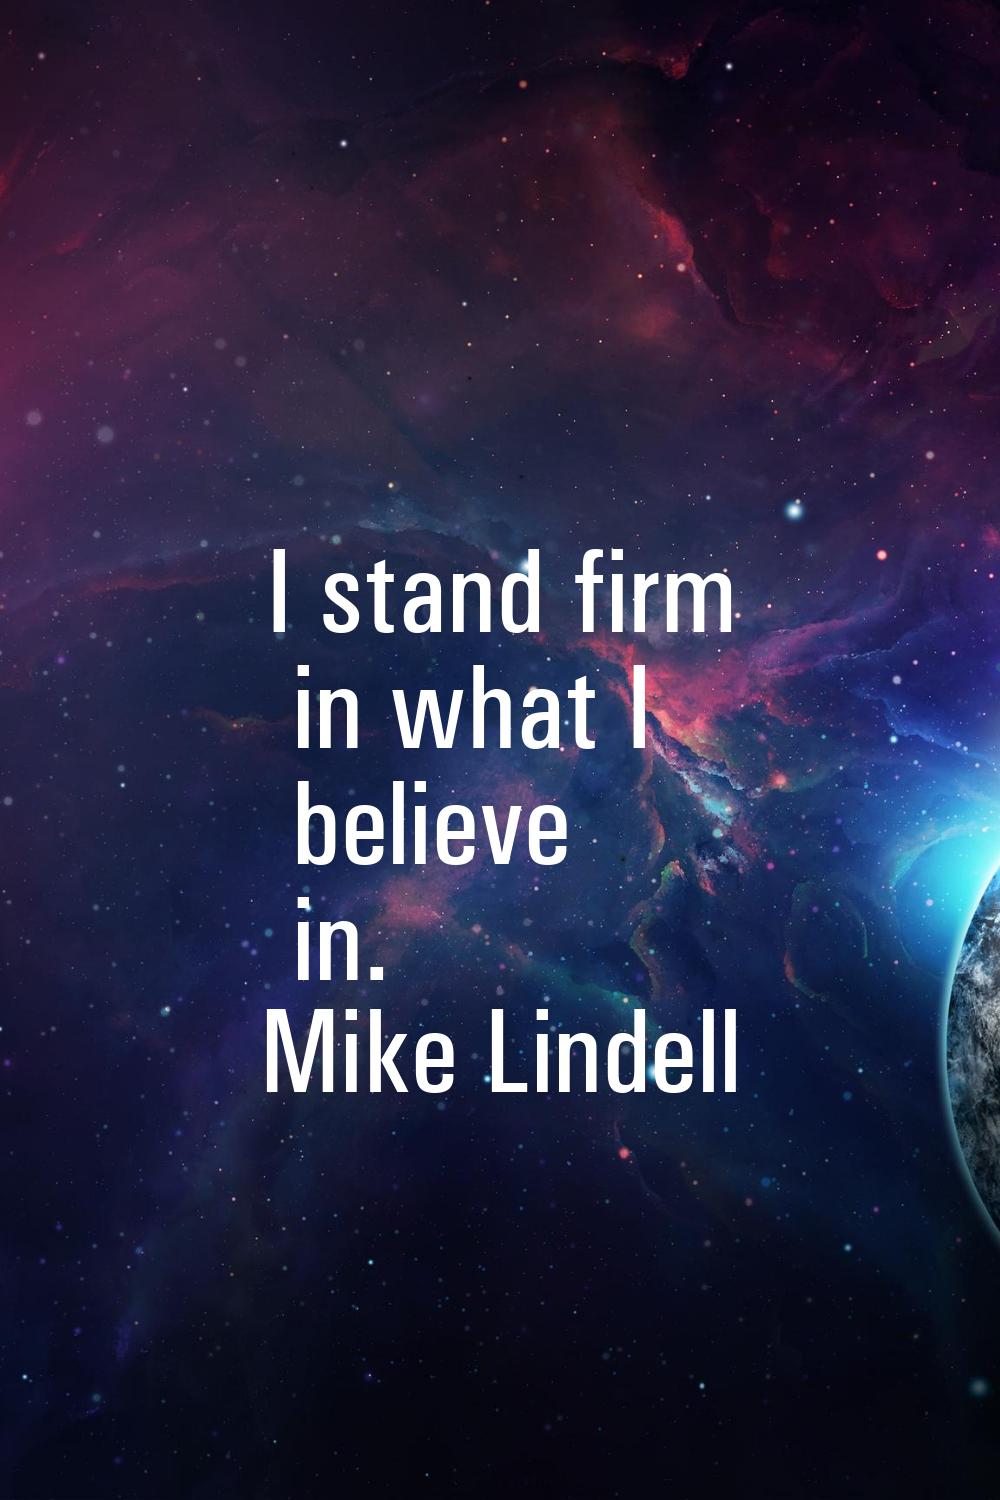 I stand firm in what I believe in.